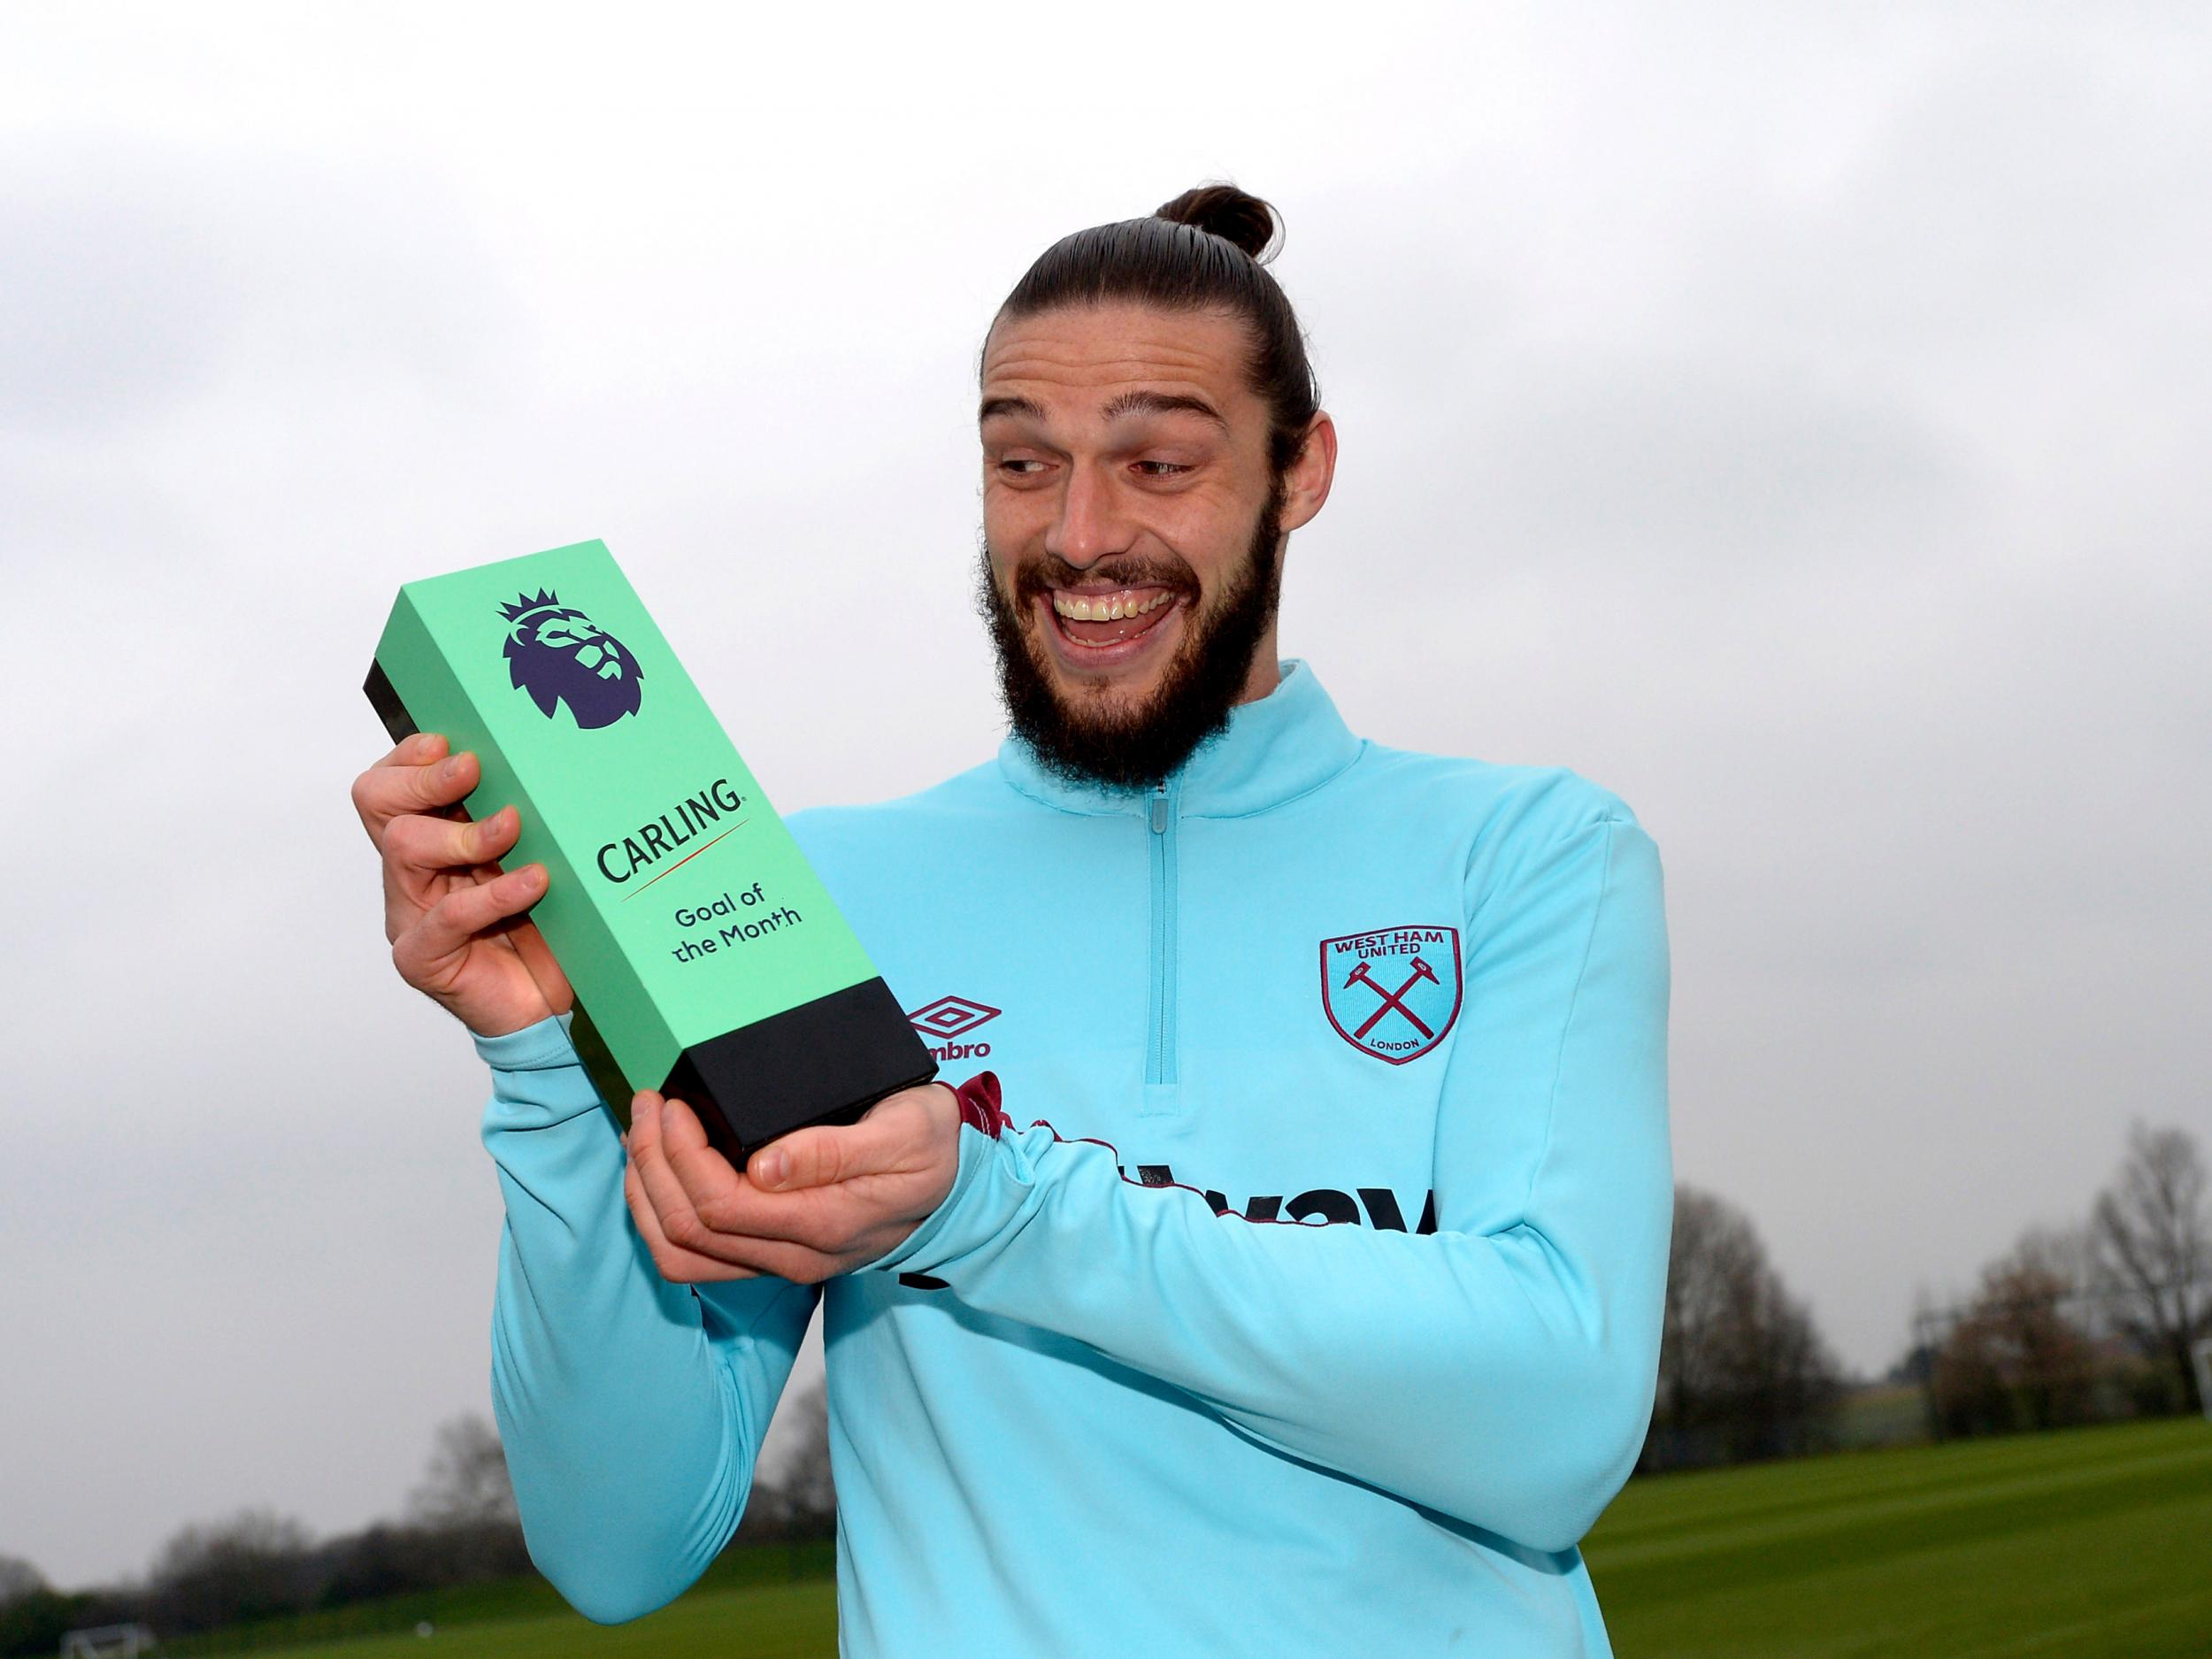 Carroll was awarded January's Goal of the Month award for his bicycle kick against Crystal Palace